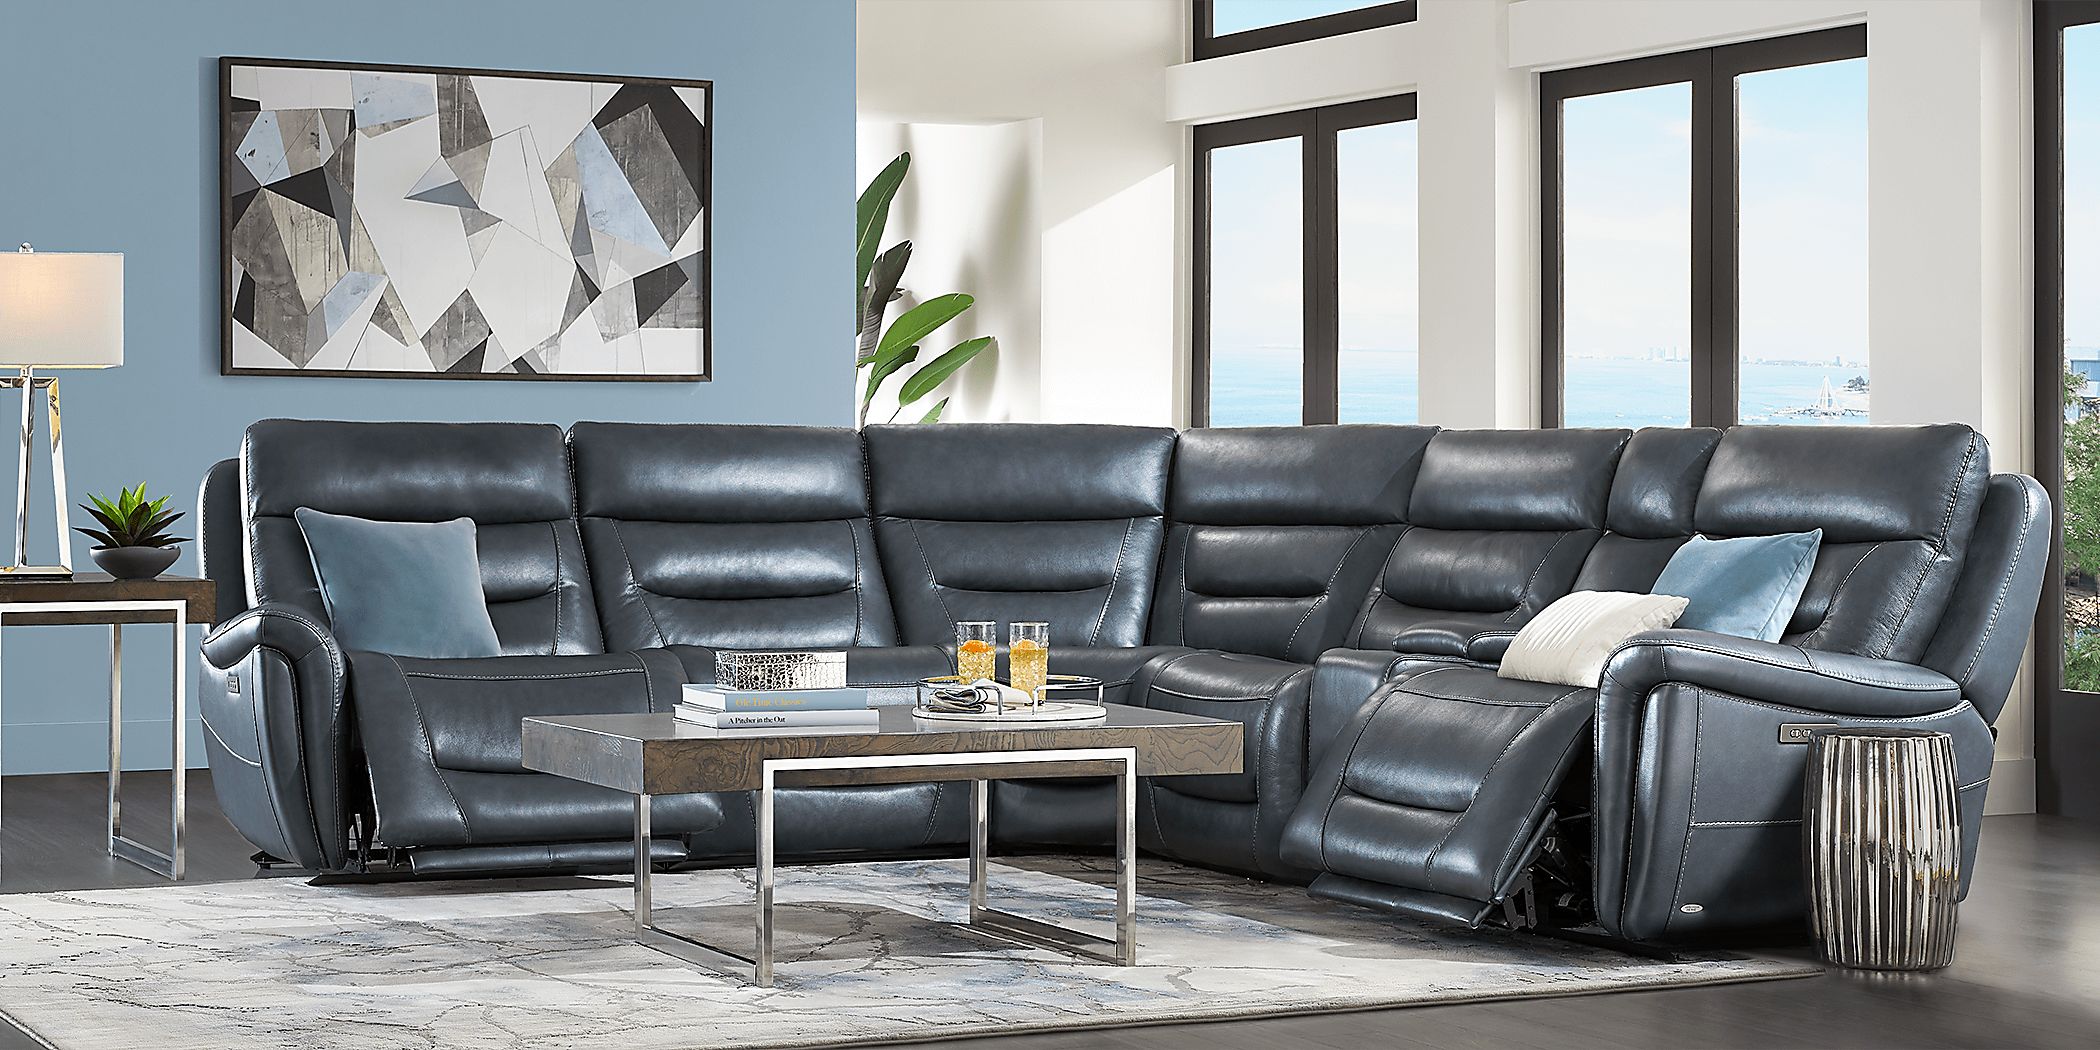 Regis Park Midnight Leather 8 Pc Dual Power Reclining Sectional Living Room